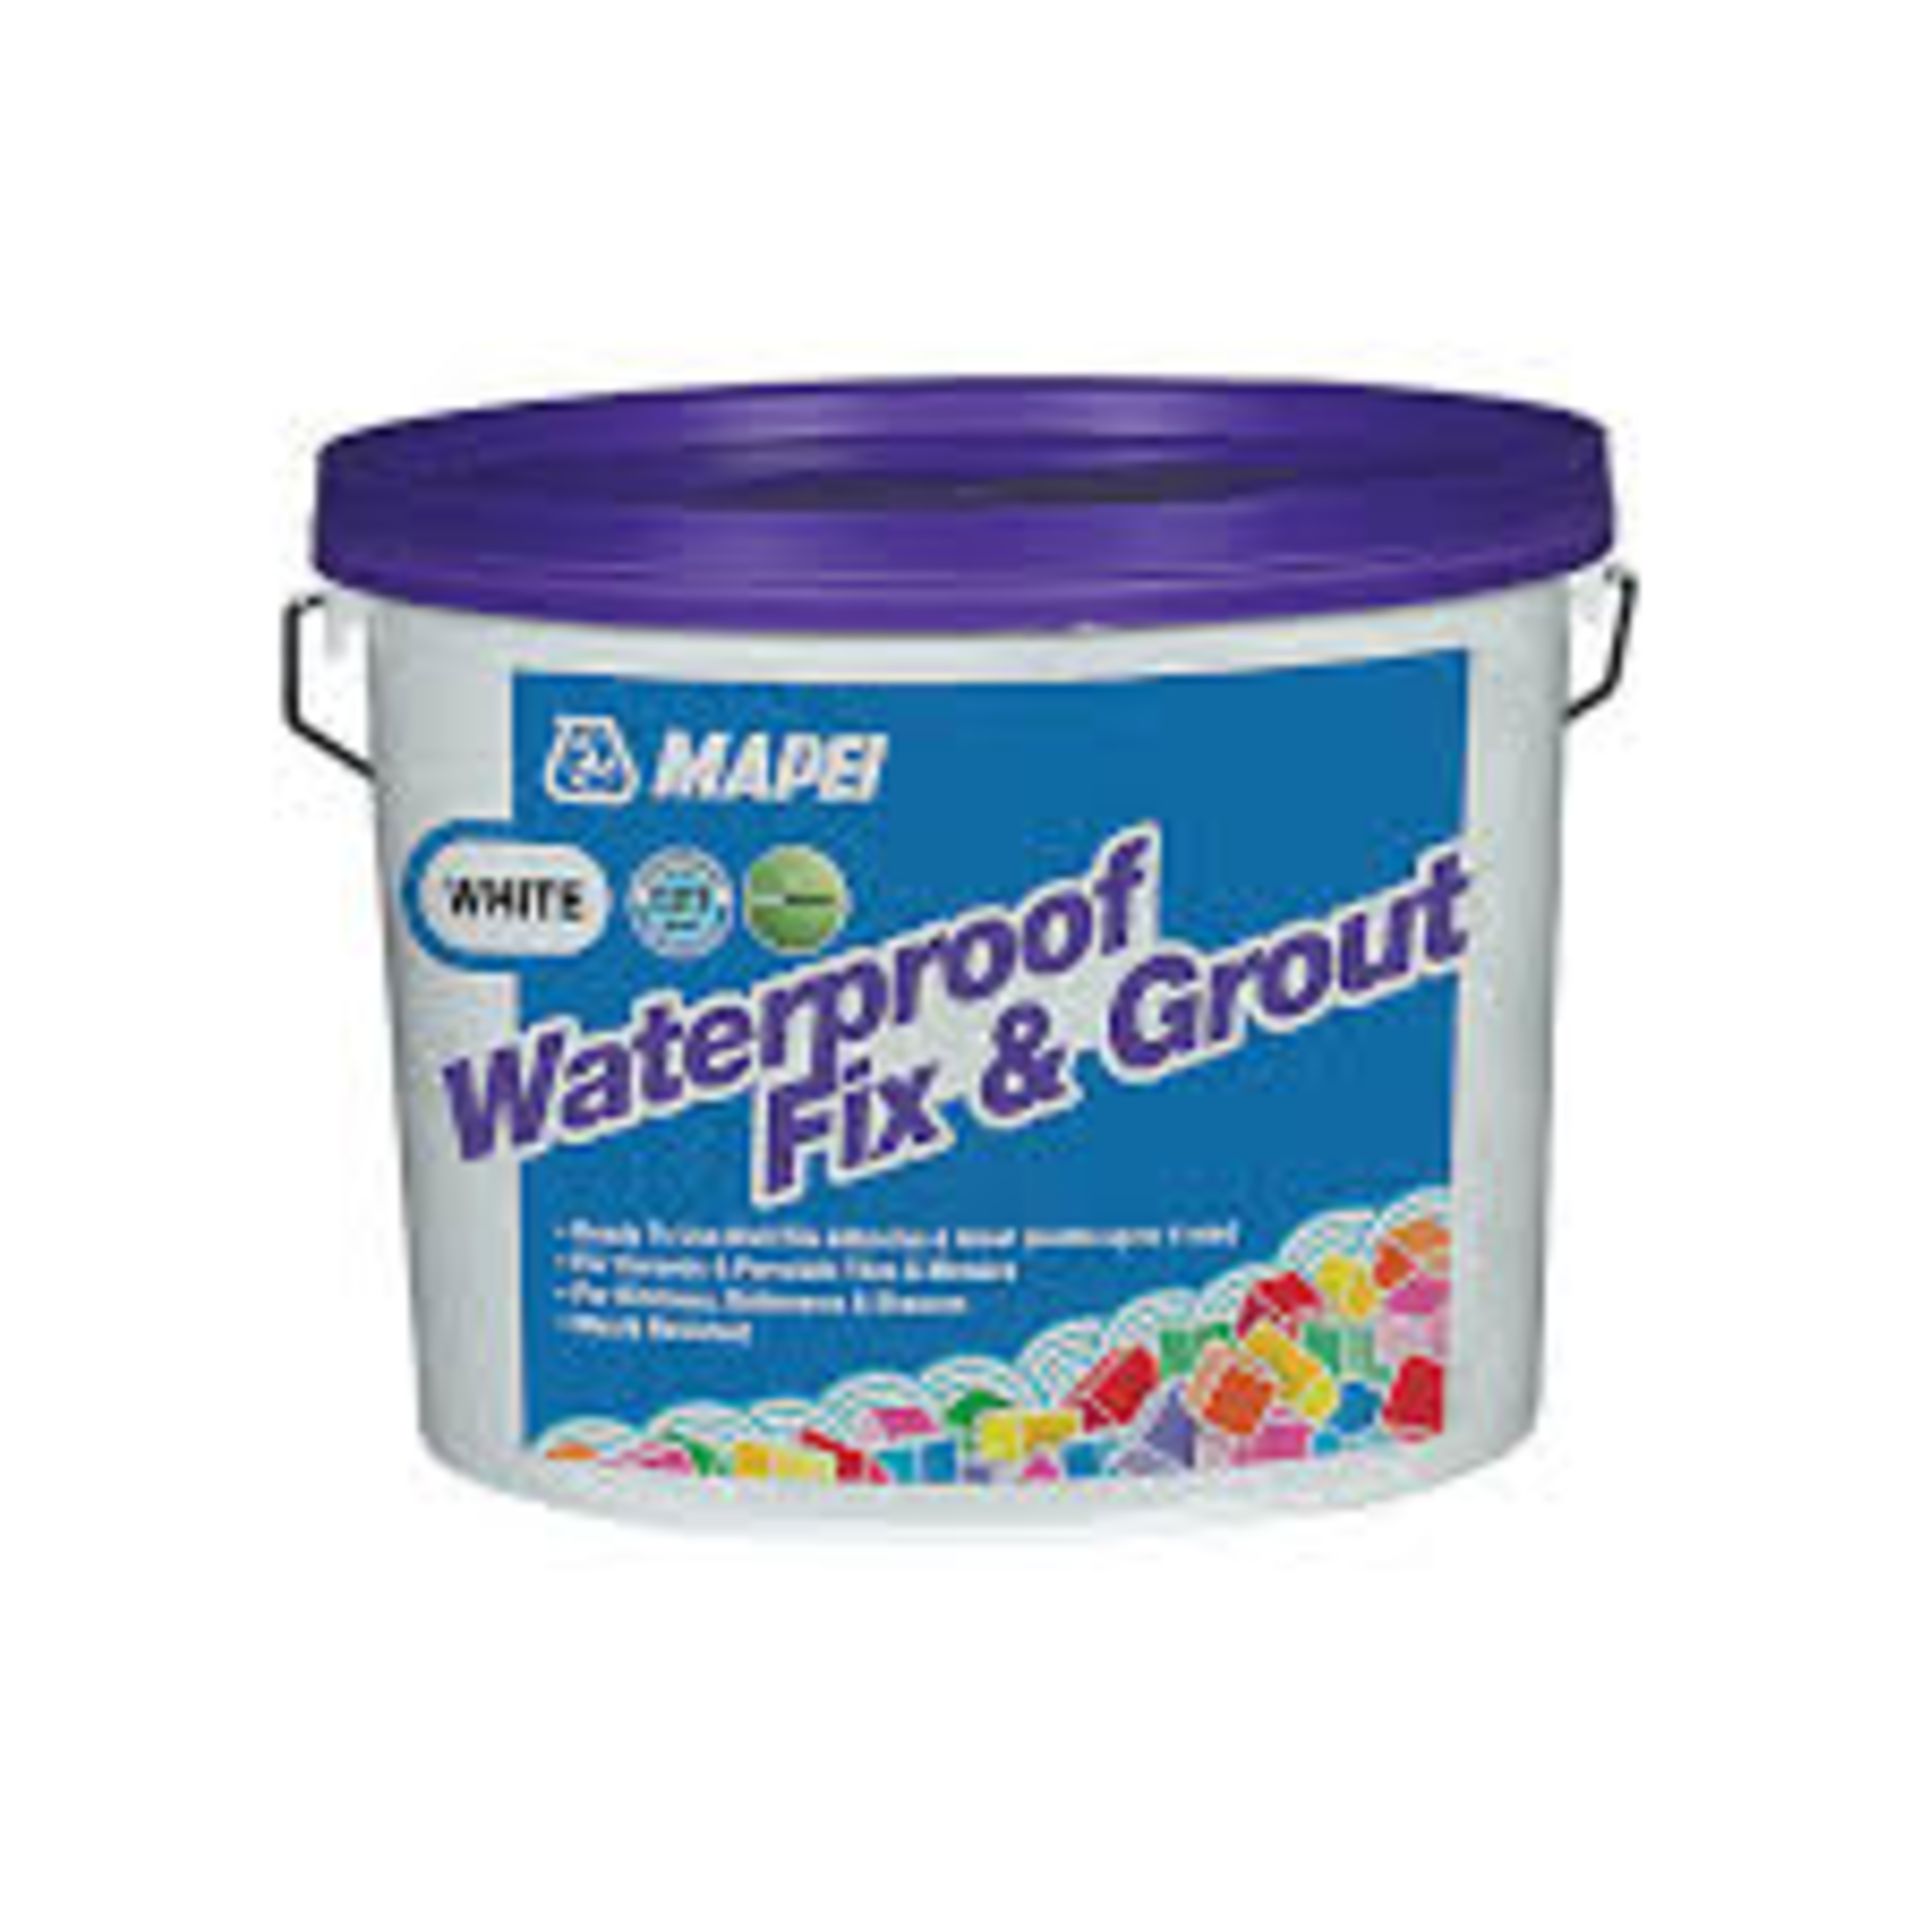 Mapei Waterproof Fix & Grout White 3.75Kg. - PW. Water based, mould-resistant adhesive and grout for